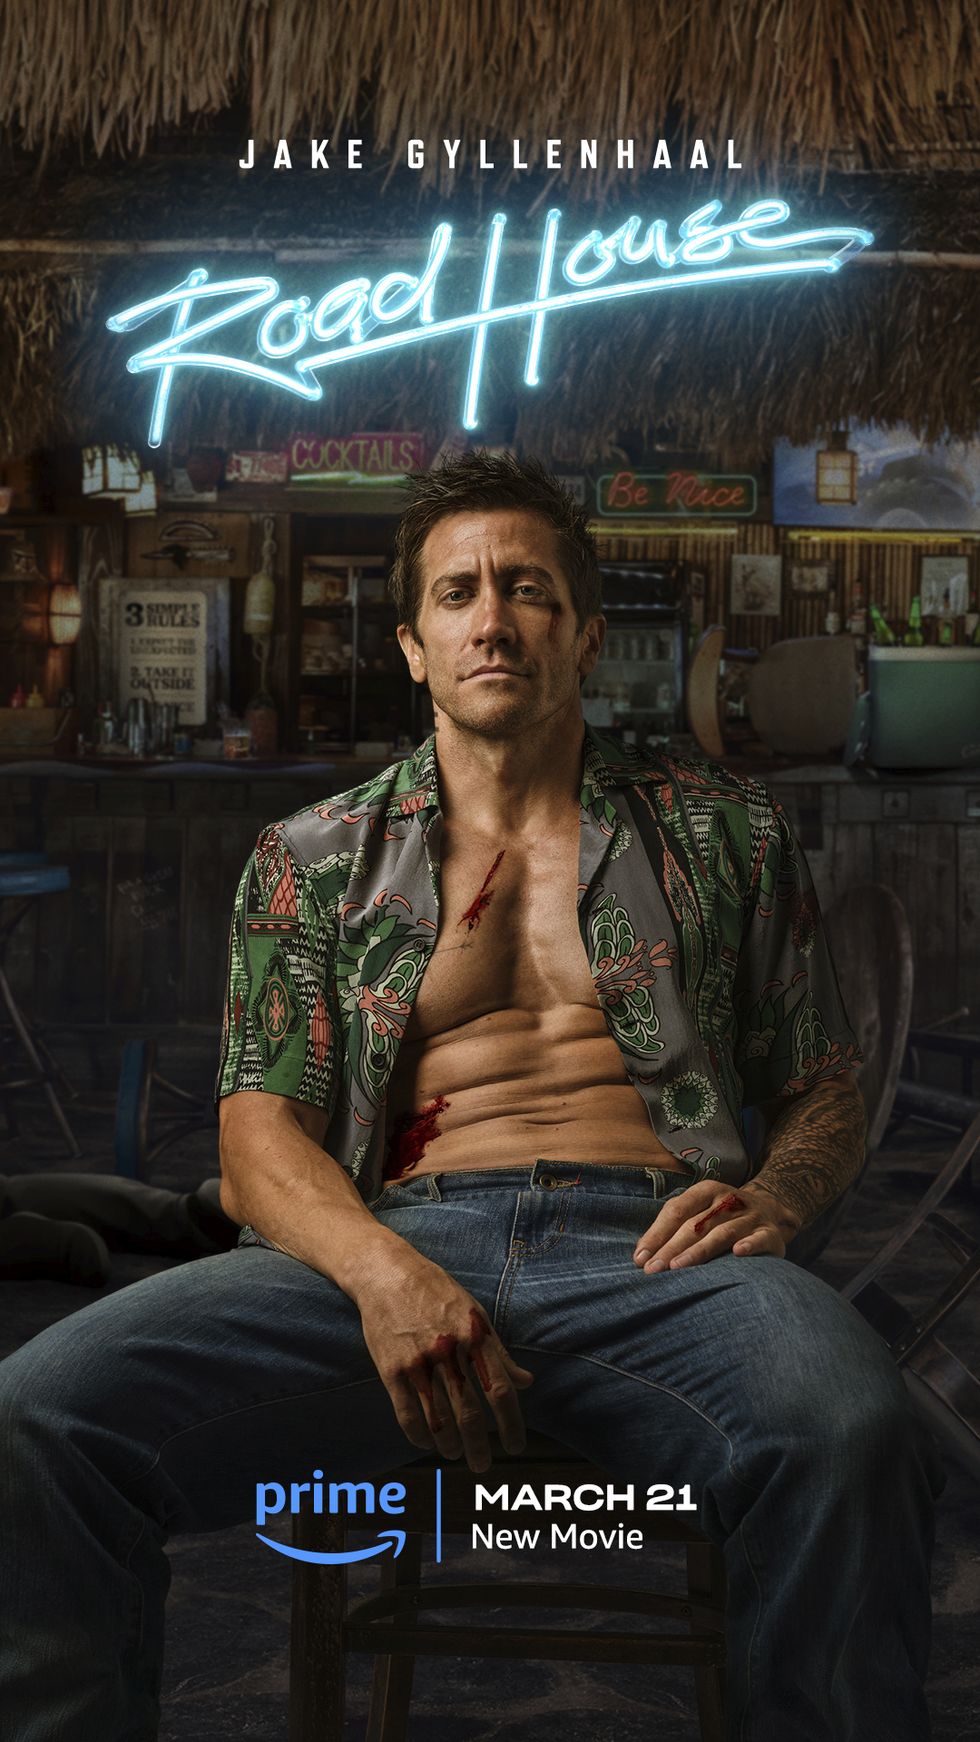 Jake Gyllenhaal's Road House remake confirms Prime Video release date